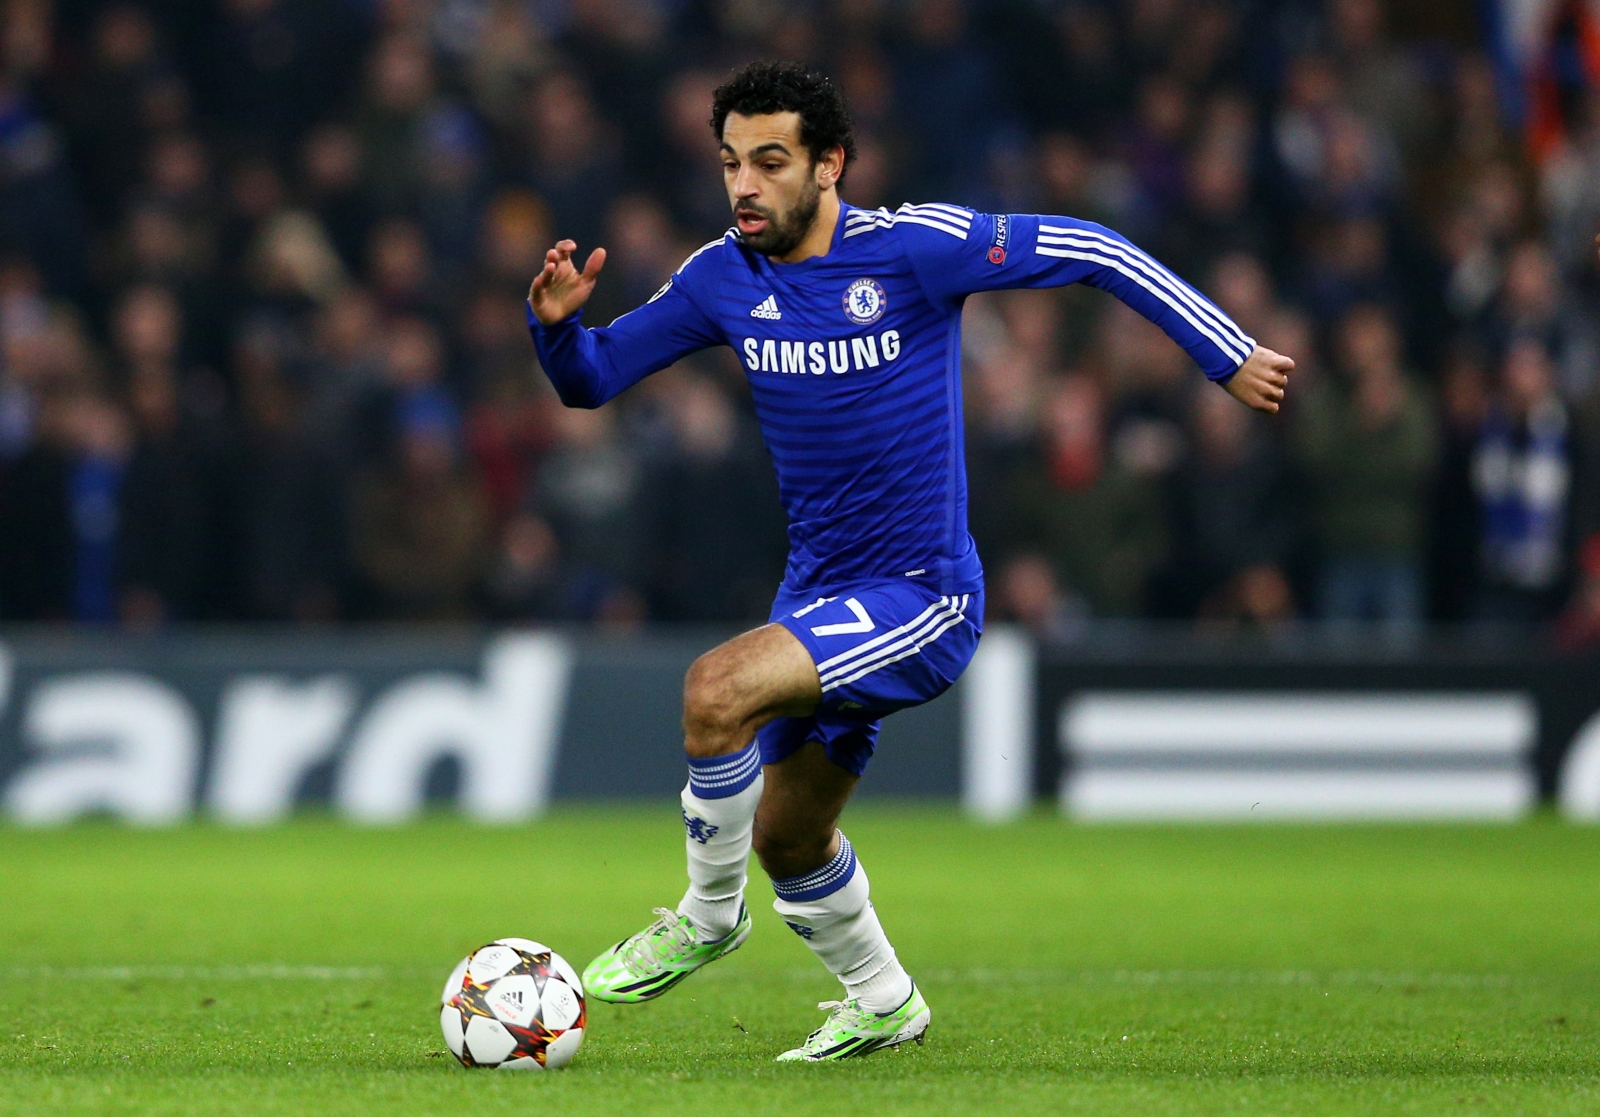 Chelsea winger Mohamed Salah set to join Roma on loan with €21m+ buying